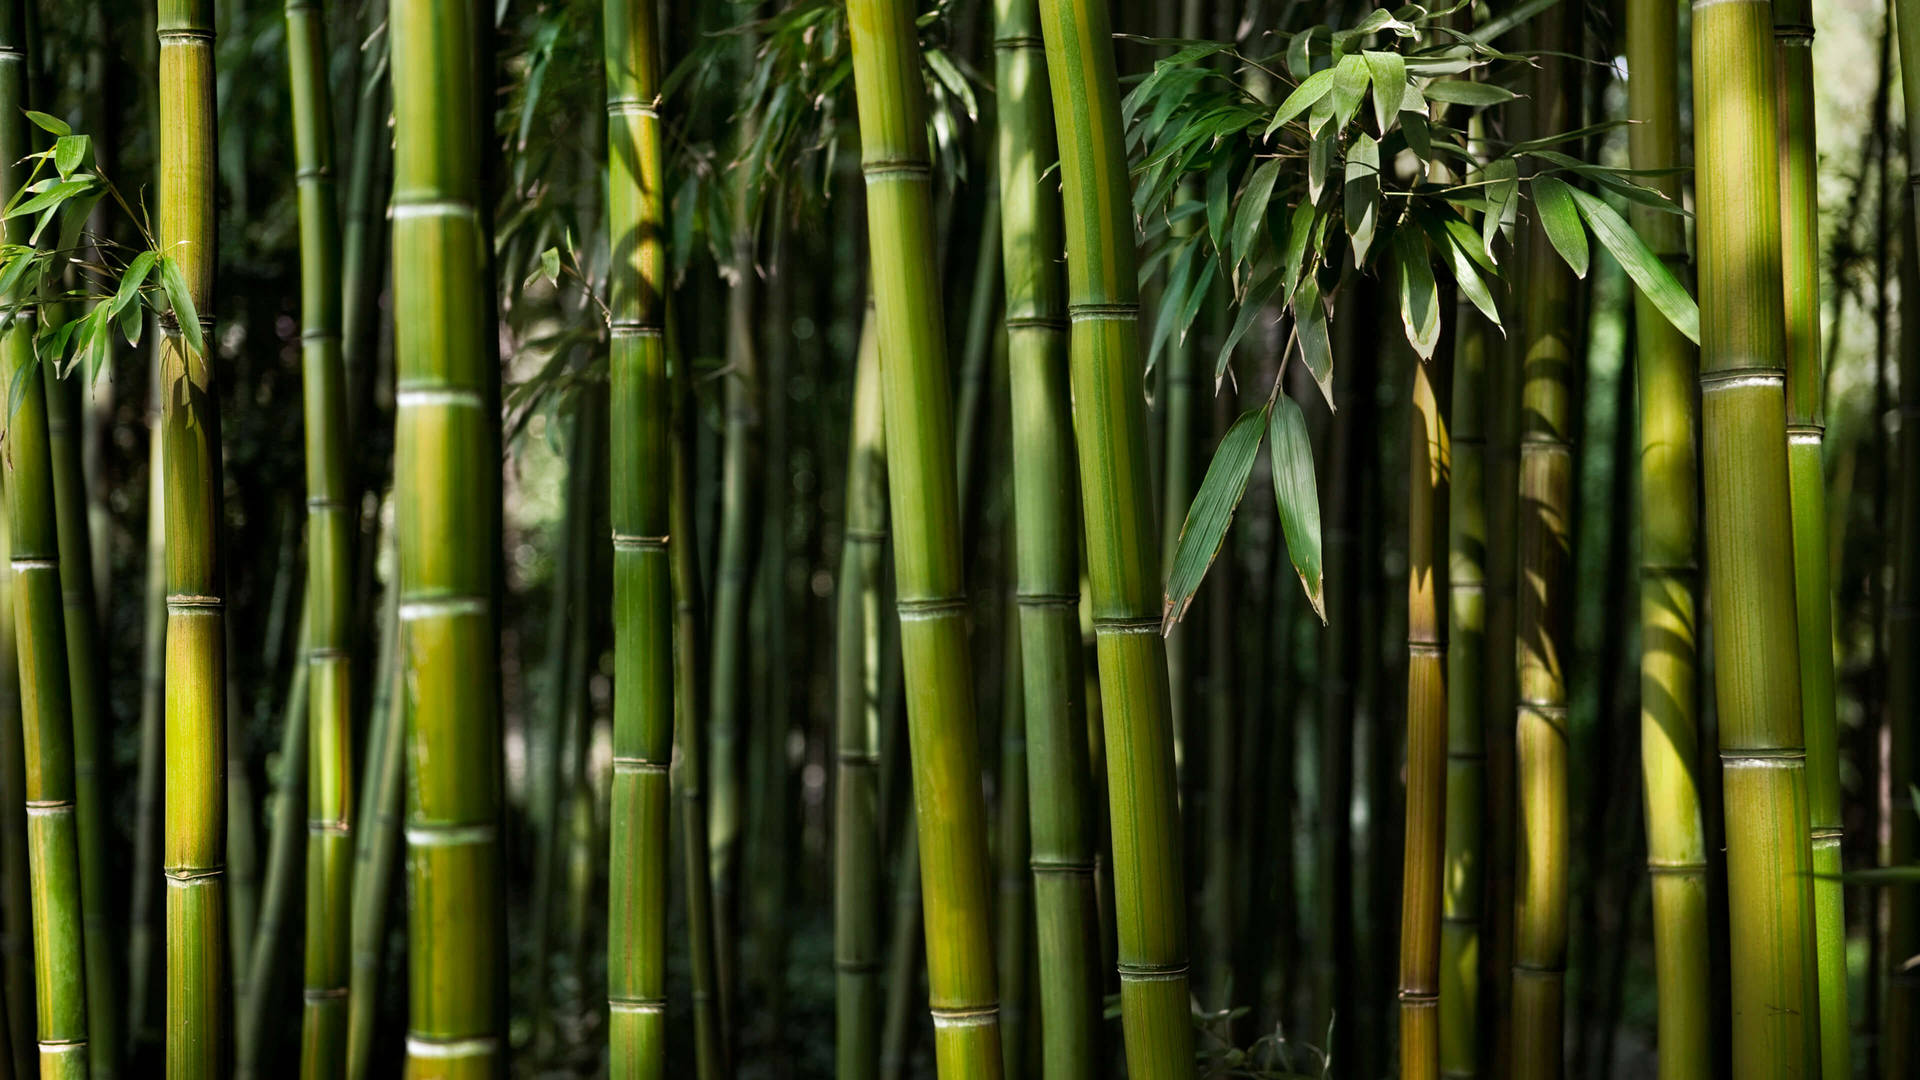 Green Bamboo 4K With Leaves Wallpaper